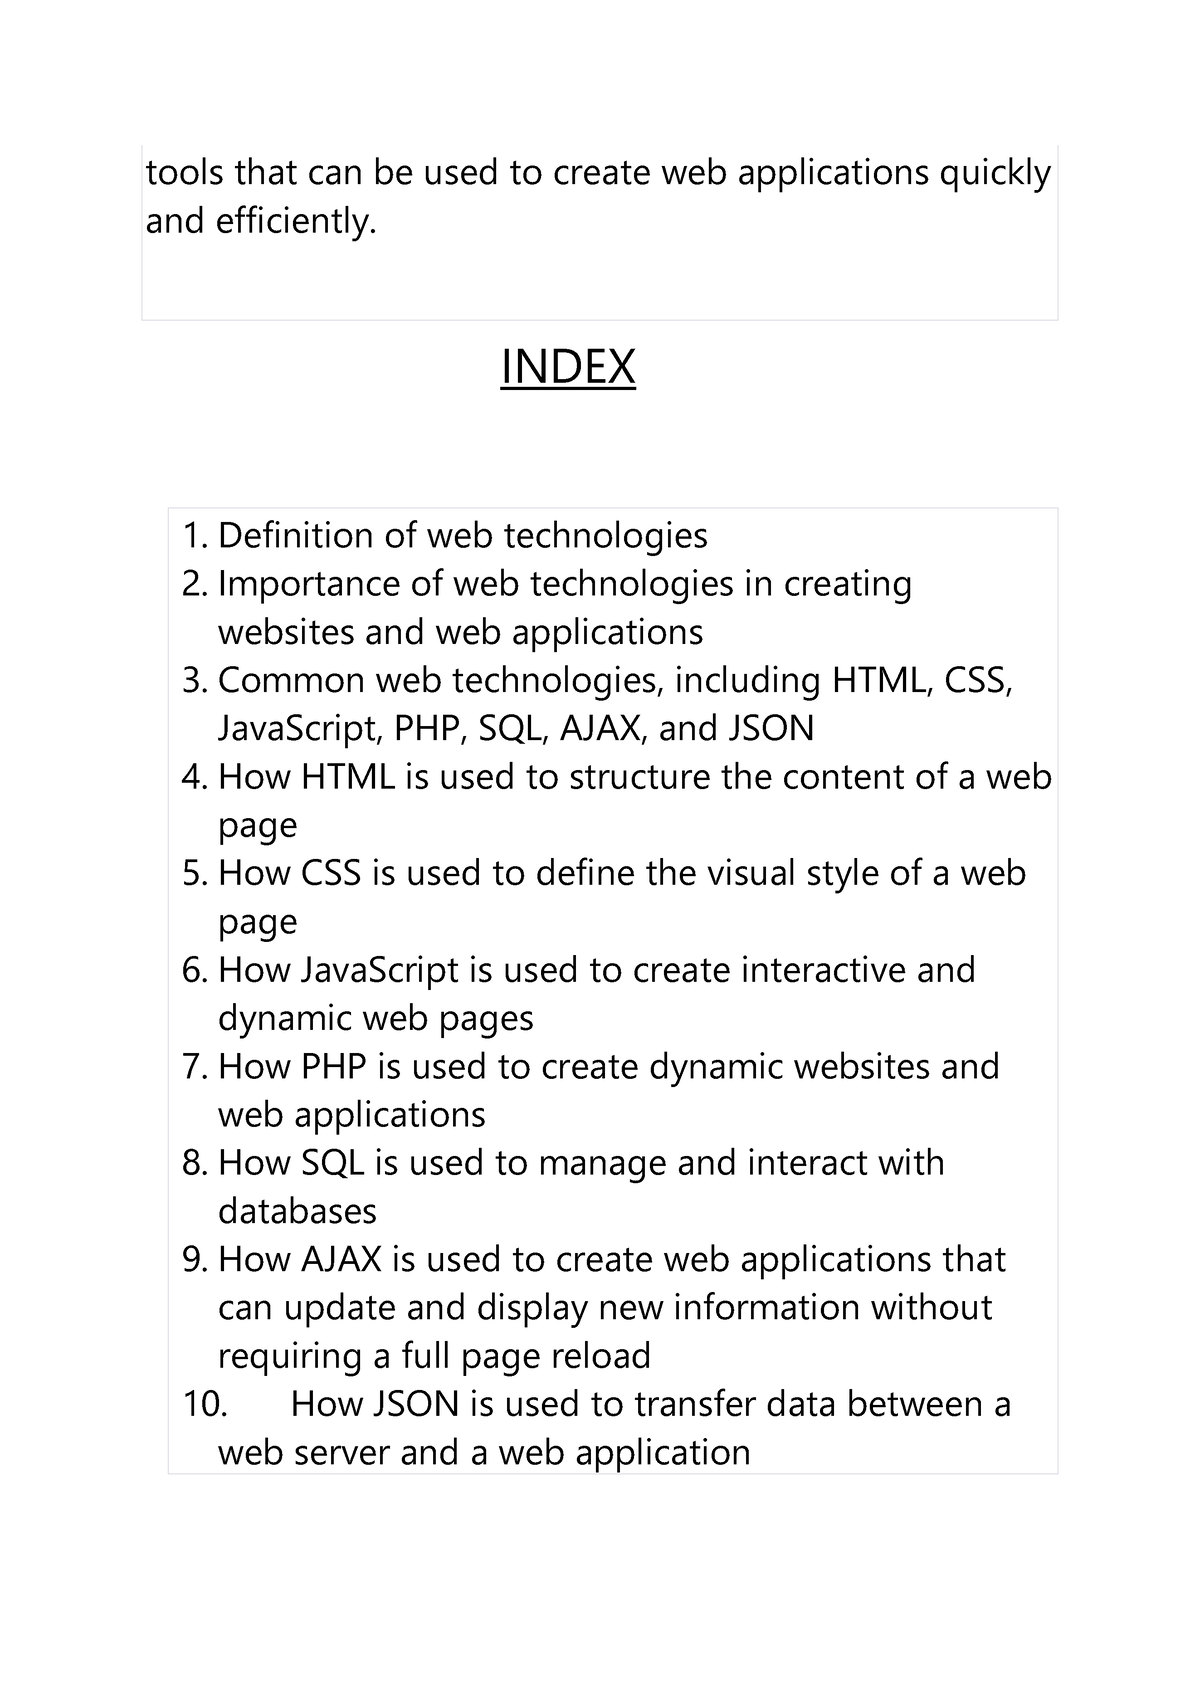 web-technologies-tools-that-can-be-used-to-create-web-applications